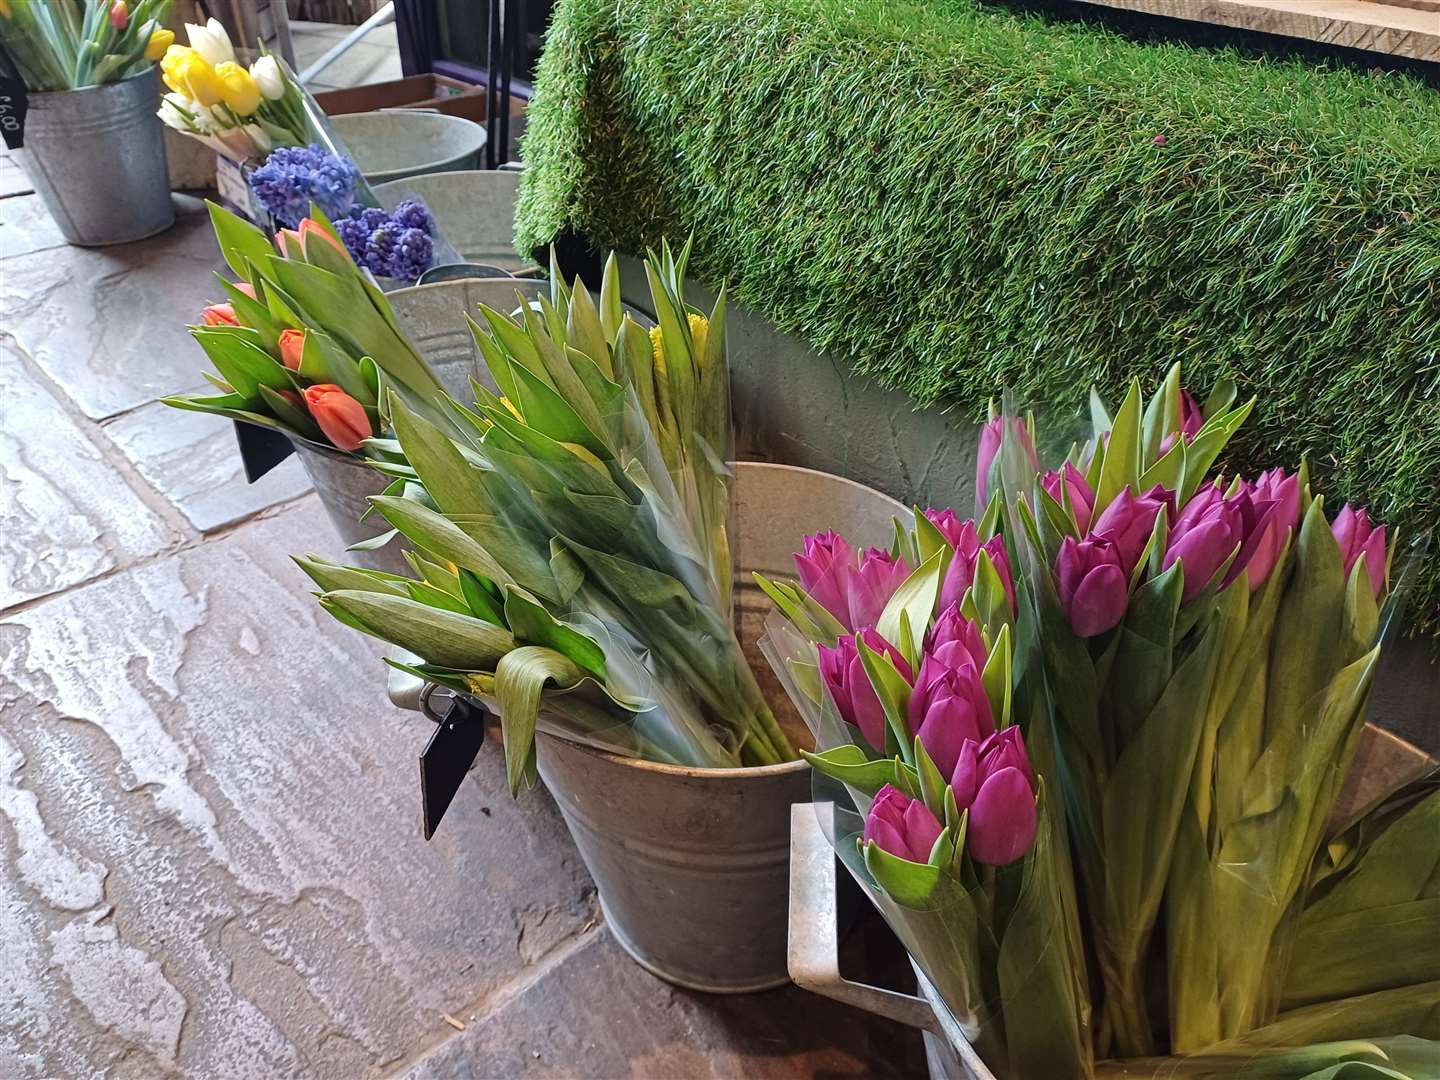 Tulips have arrived in time for spring